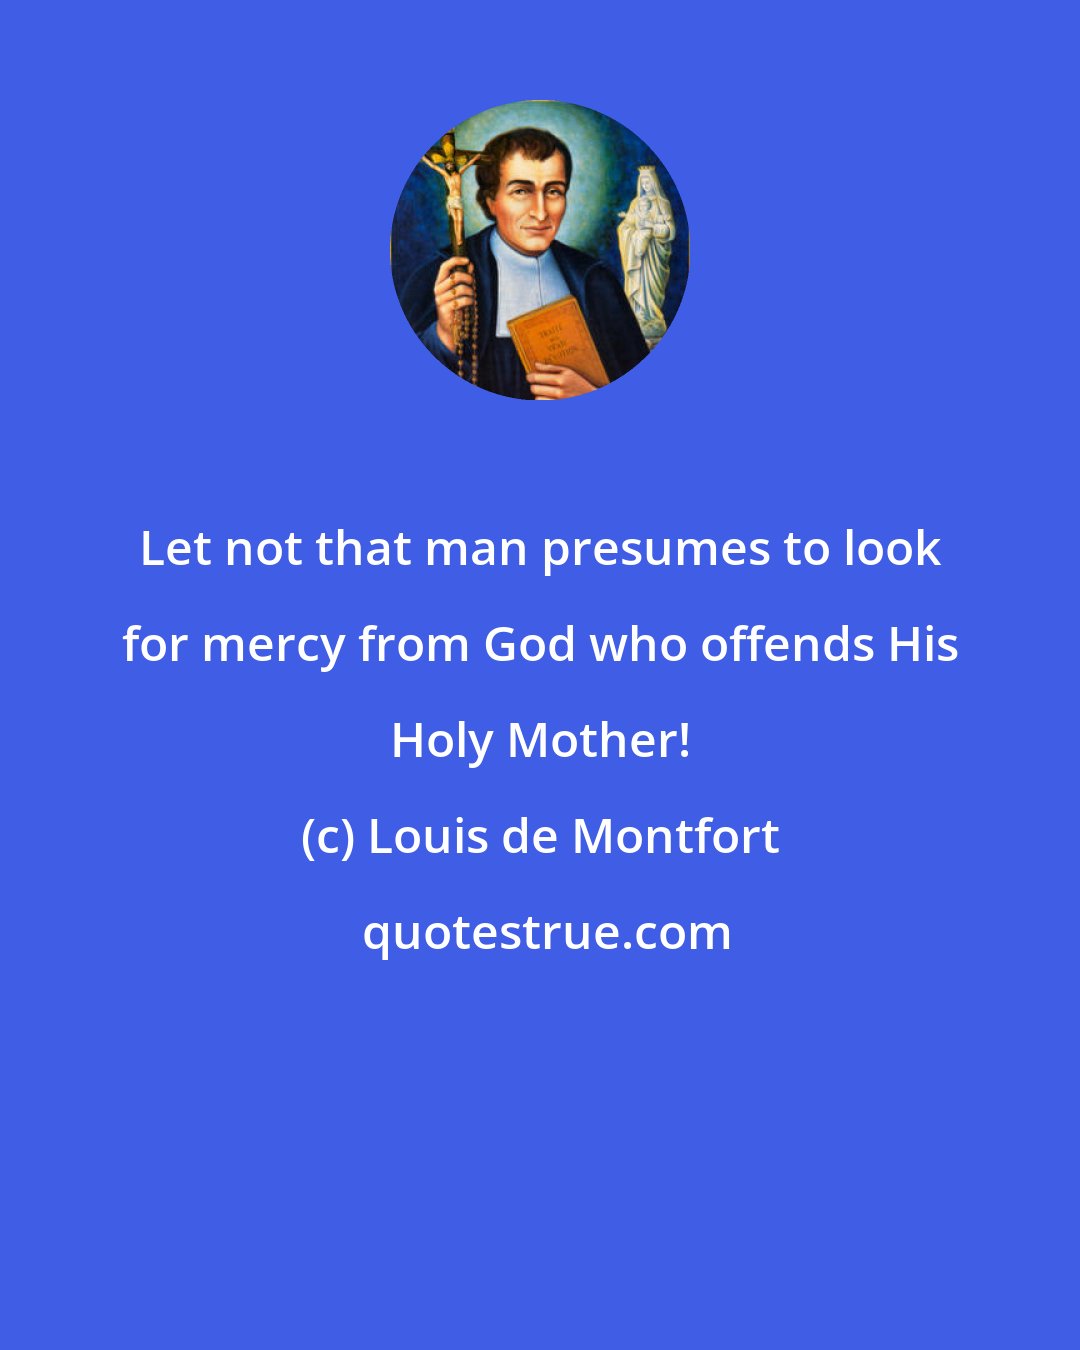 Louis de Montfort: Let not that man presumes to look for mercy from God who offends His Holy Mother!